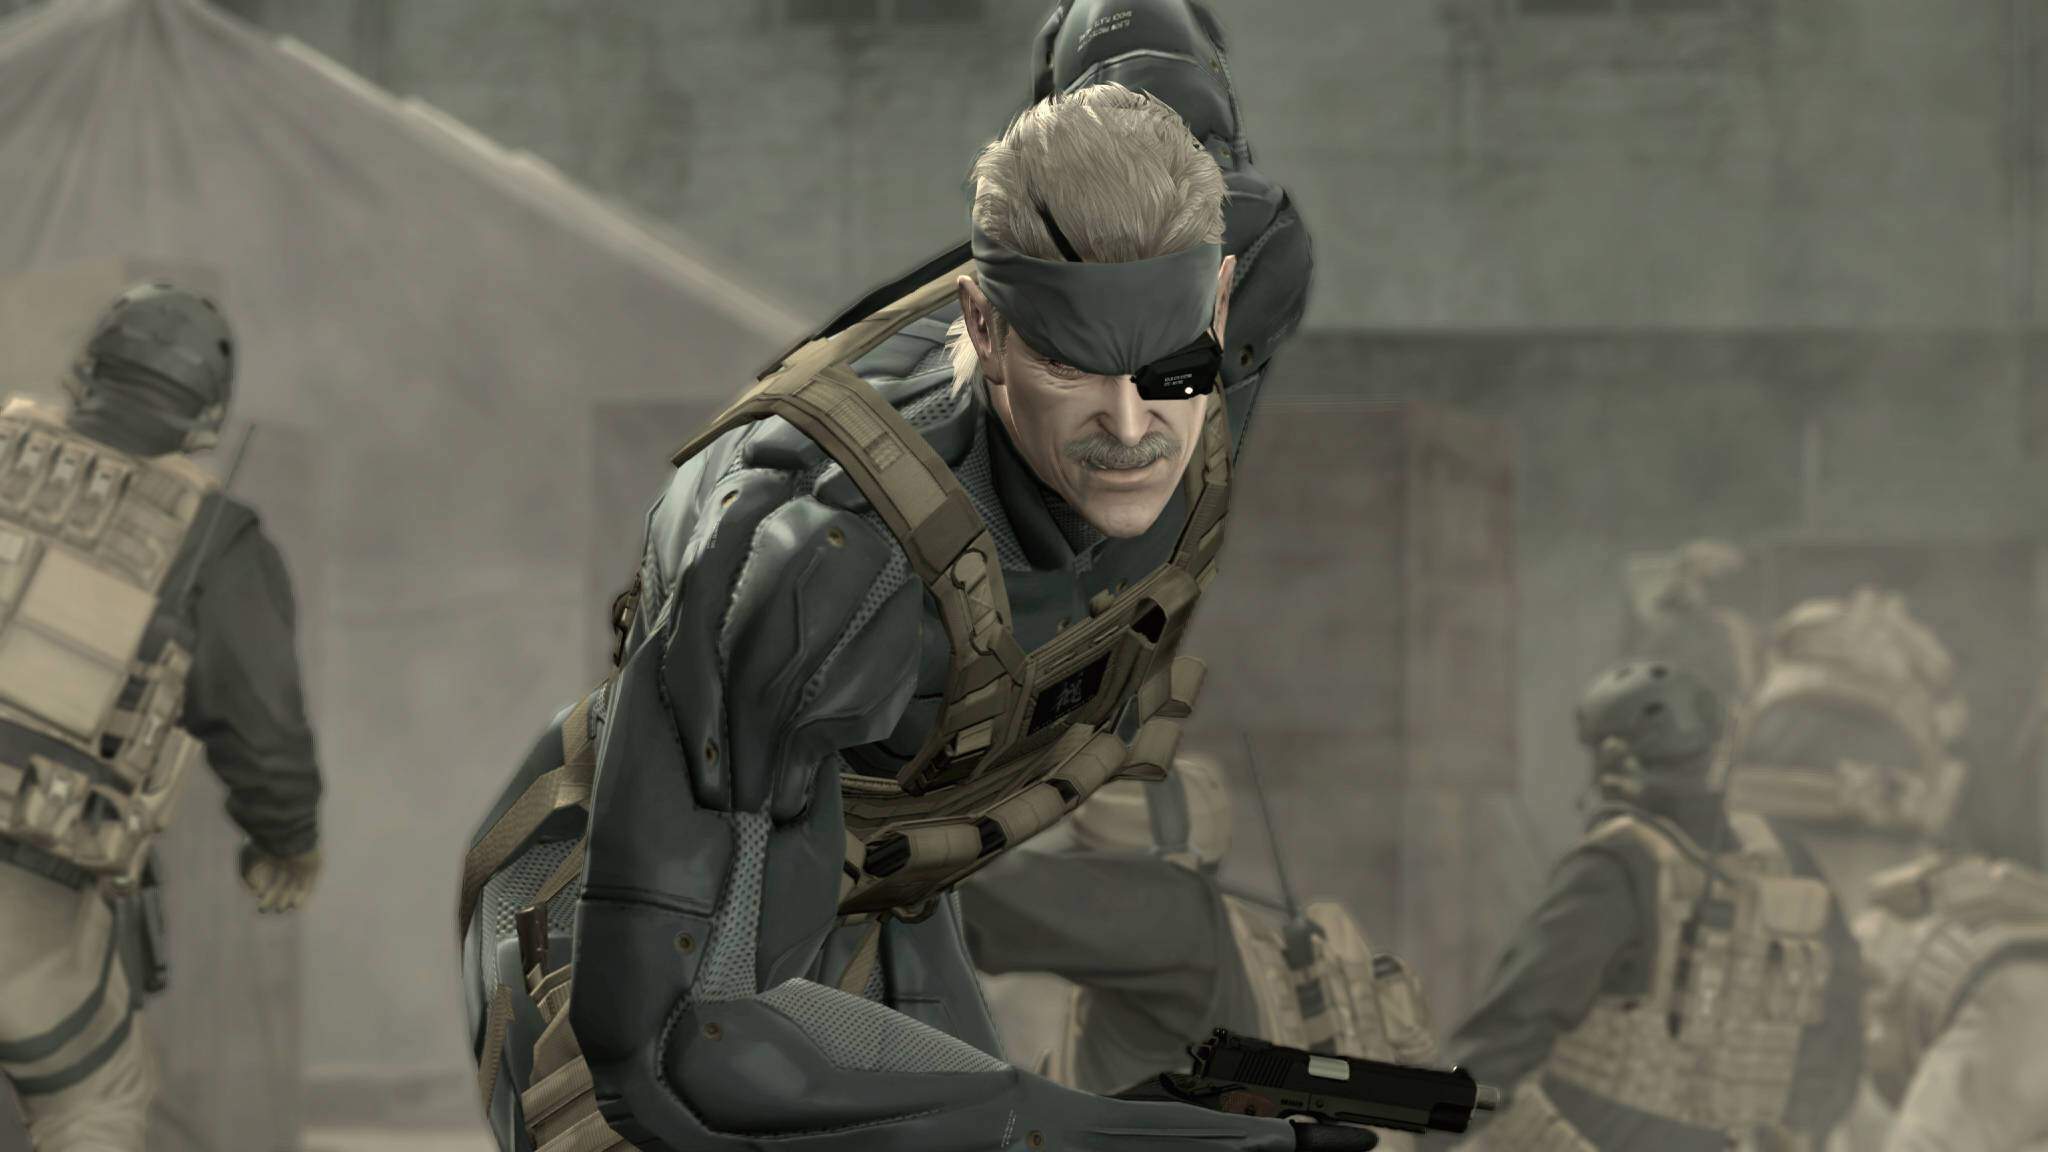 play metal gear solid 4 on ps4